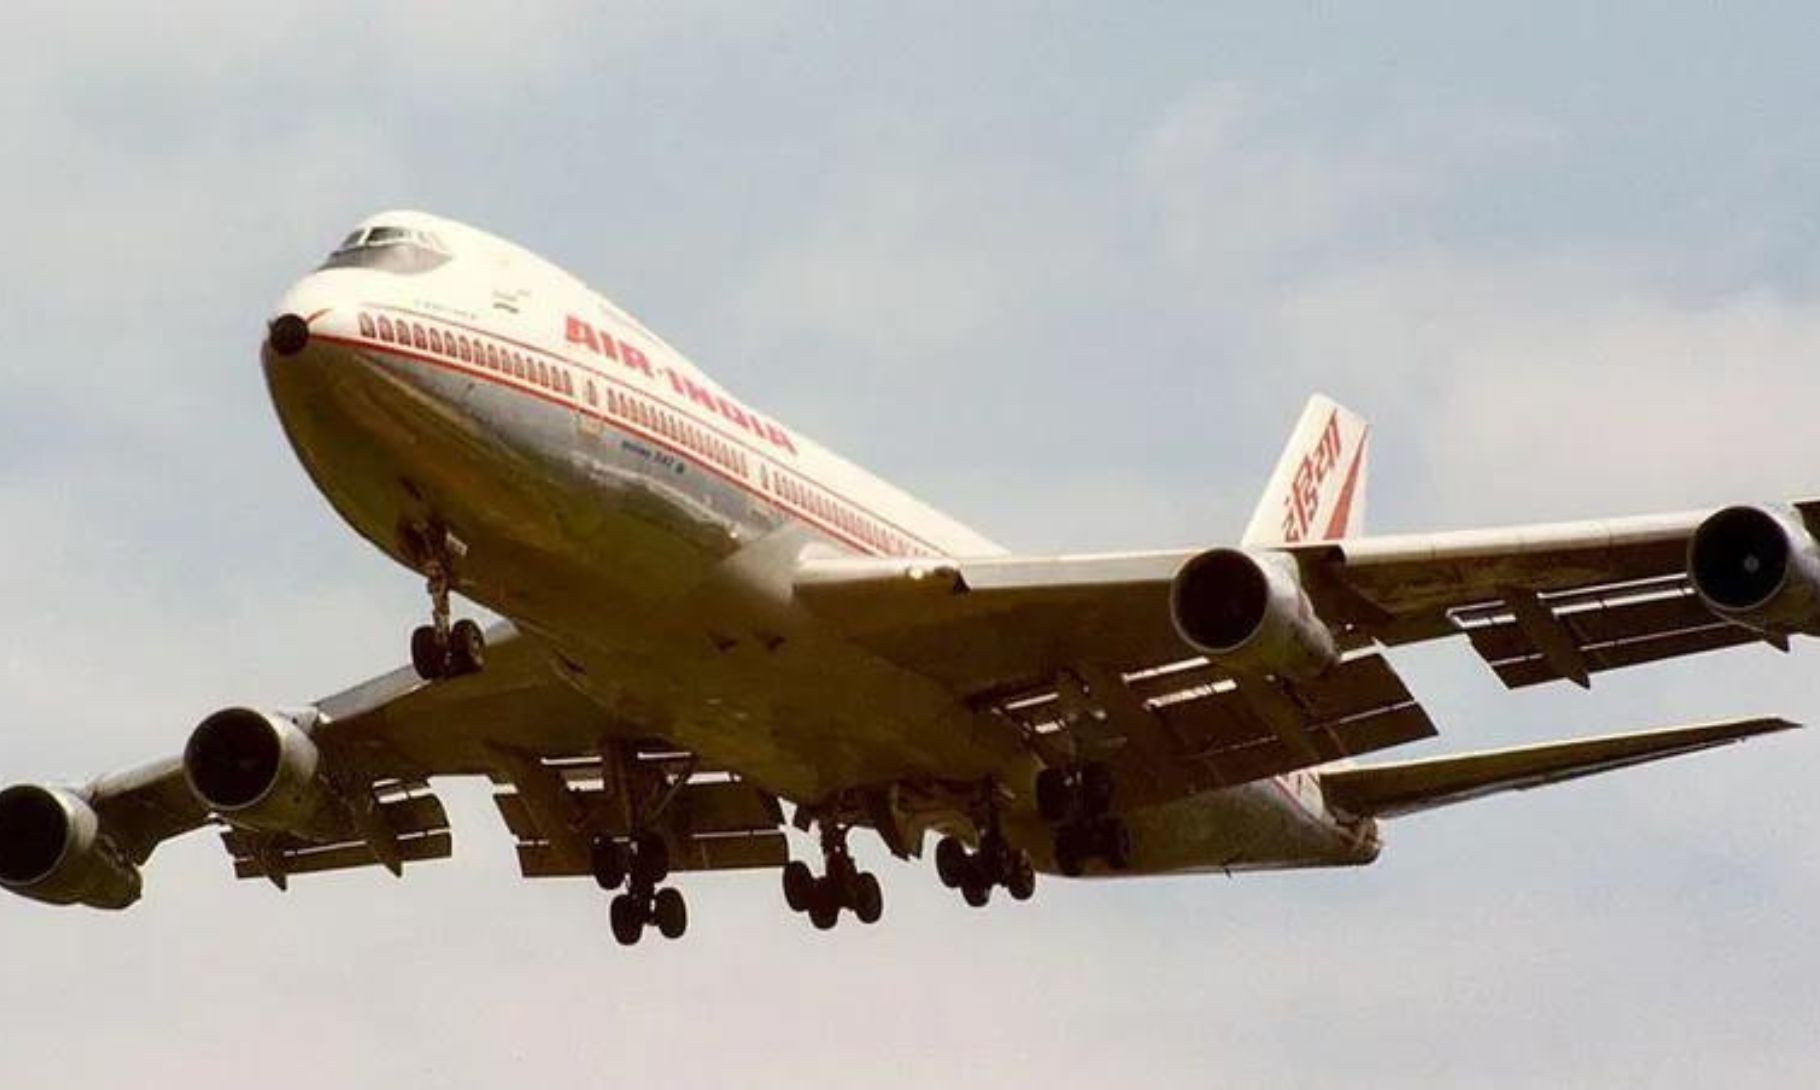 1985 Air India Kanishka Bombing: Events And India-Canada Dispute Explained